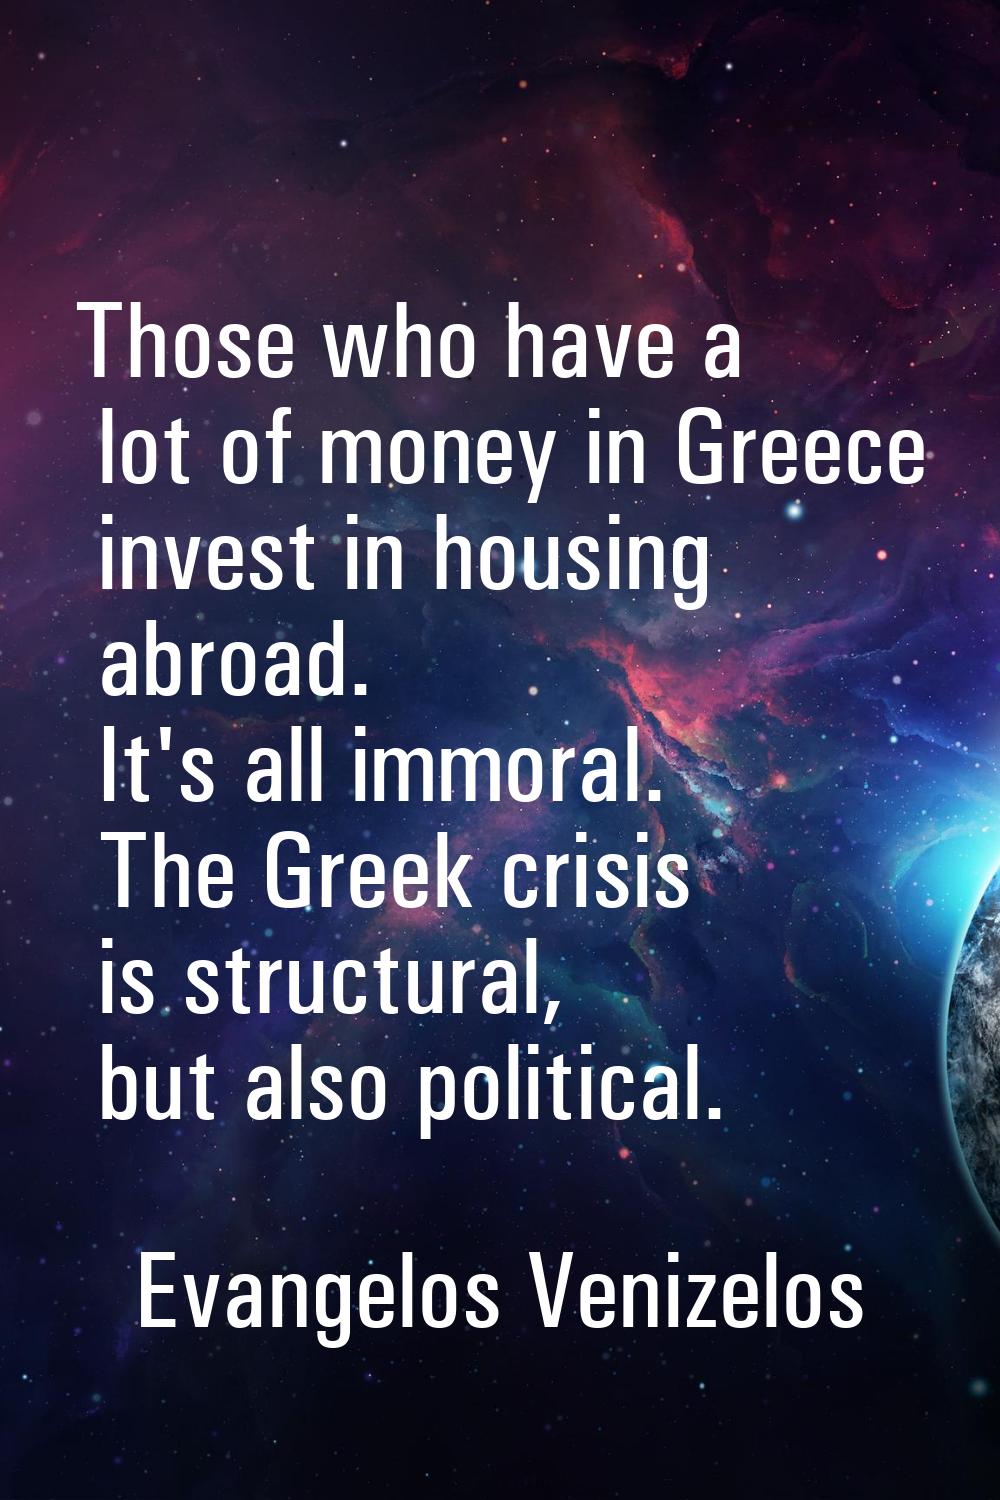 Those who have a lot of money in Greece invest in housing abroad. It's all immoral. The Greek crisi